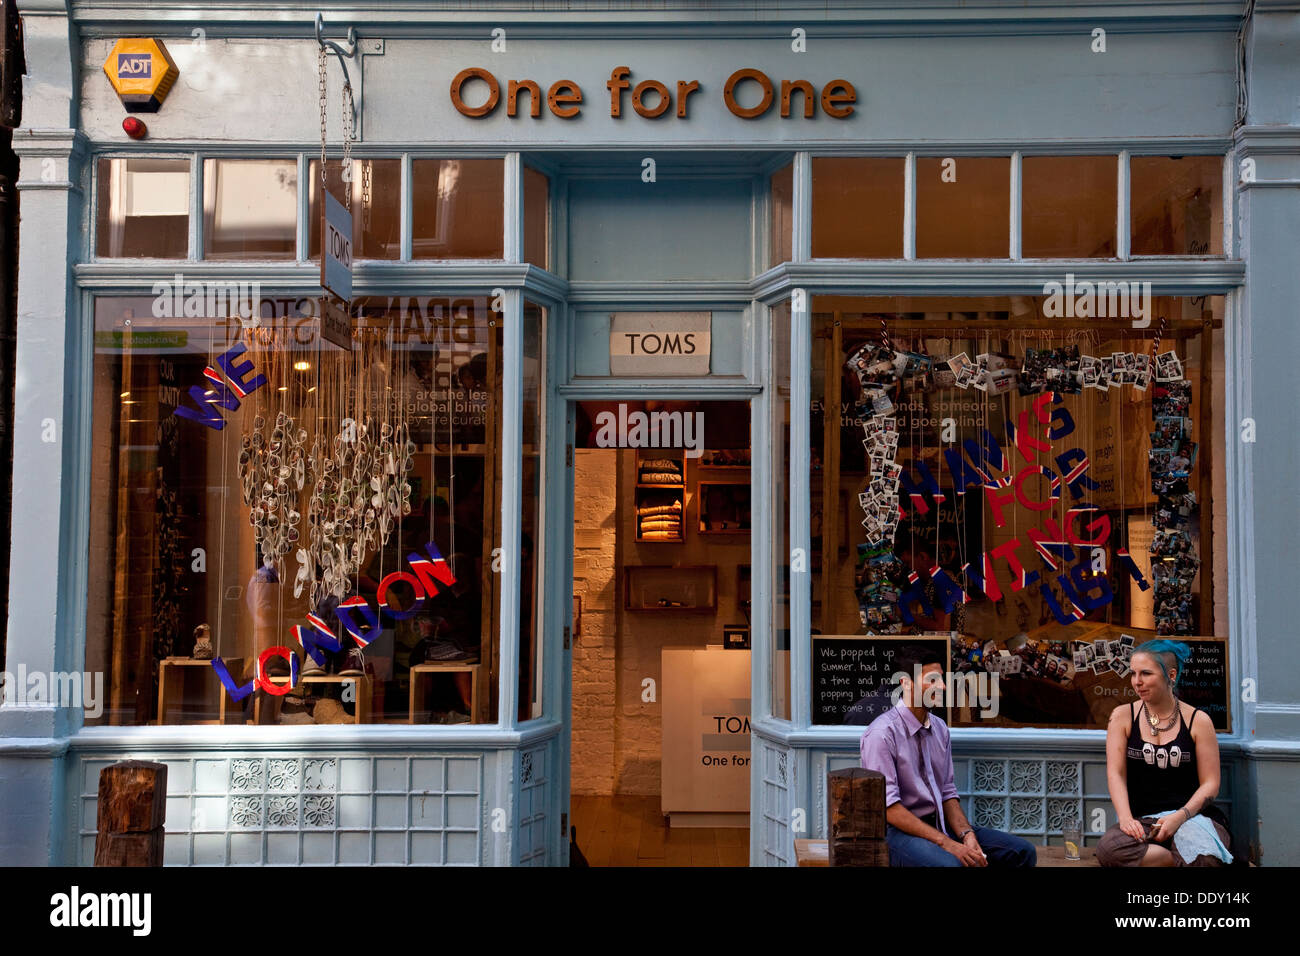 Toms One for One Shoe Store, Covent Garden, London Stock Photo - Alamy